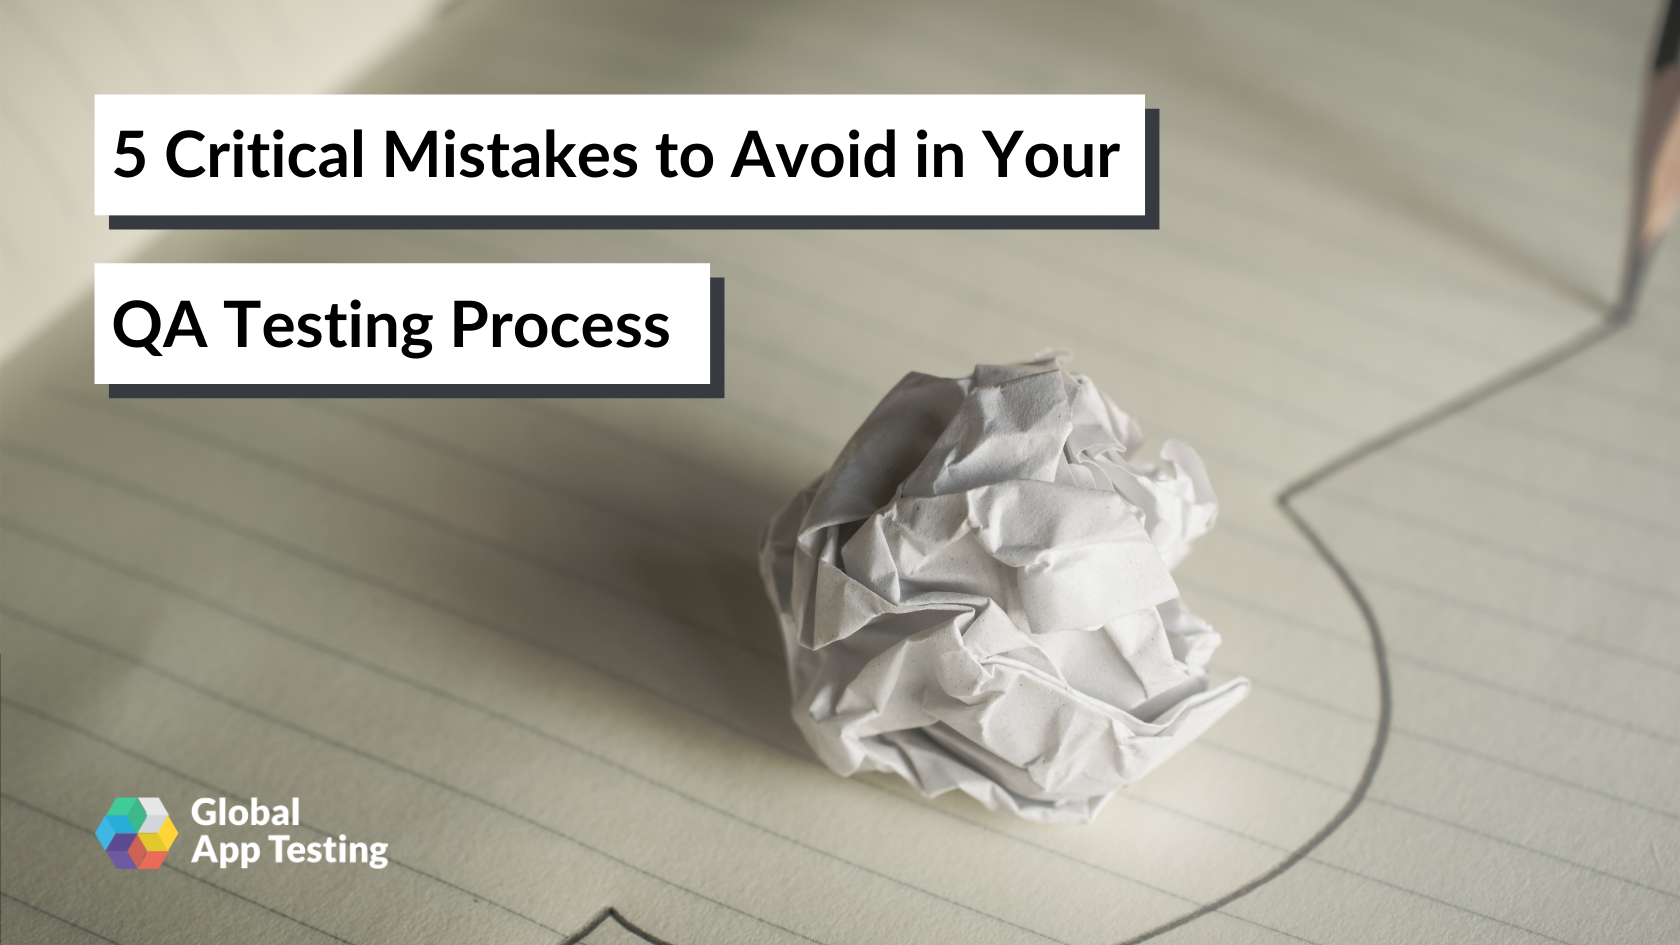 5 Critical Mistakes to Avoid in Your QA Testing Process